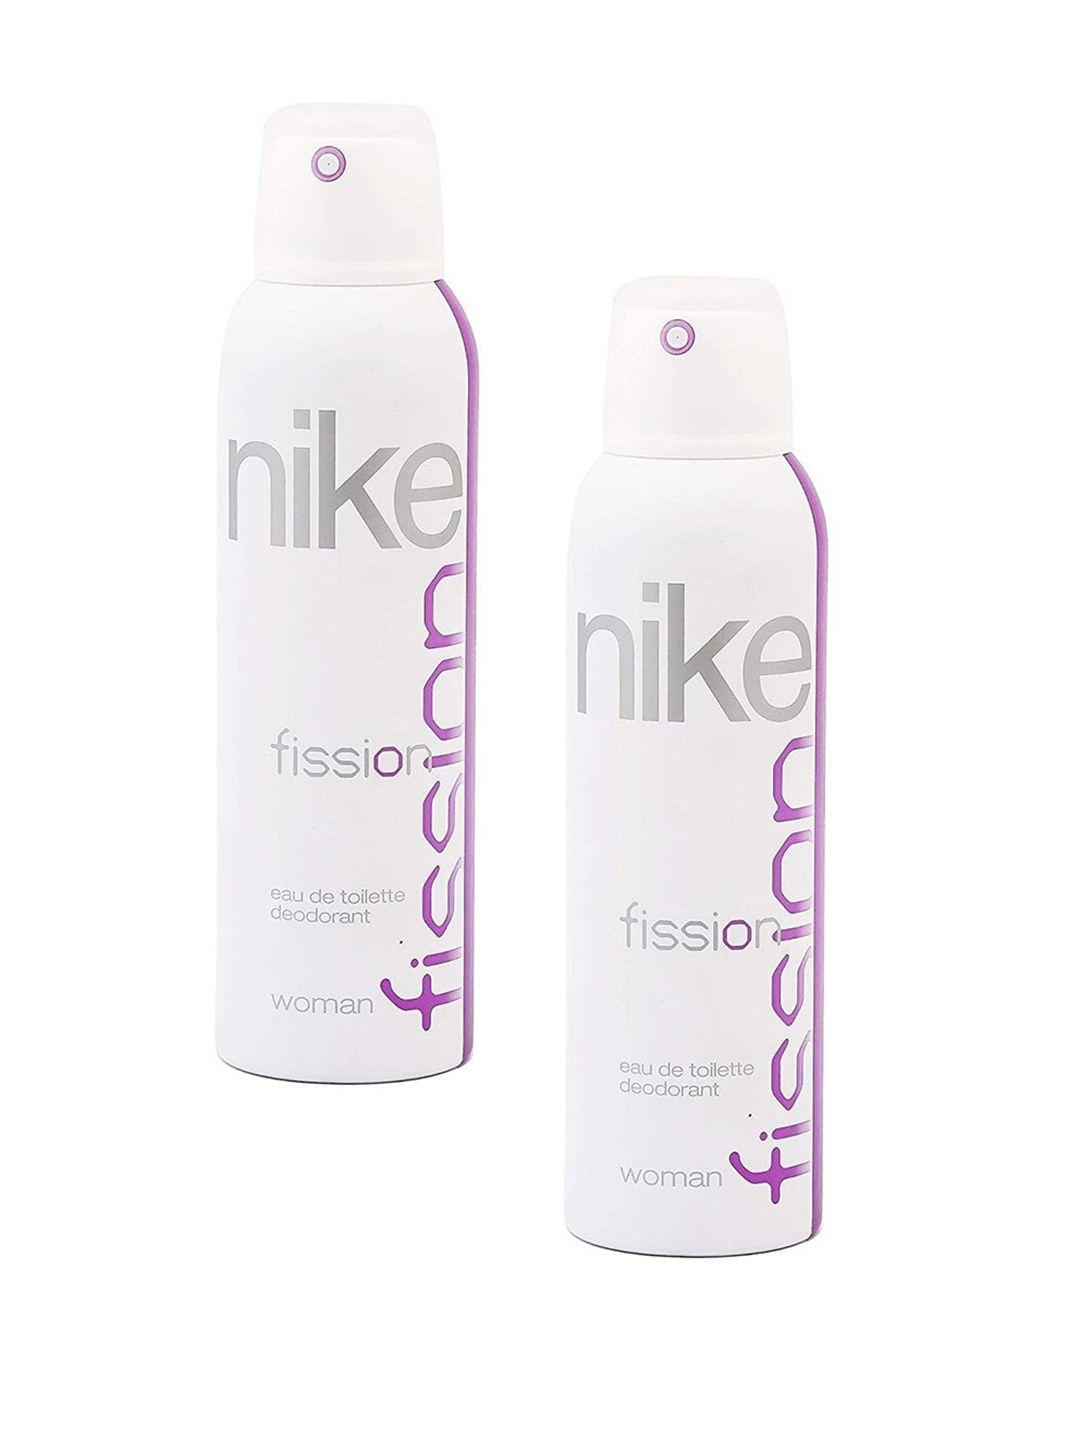 nike pack of 2 woman fission deodorant - 200 ml each